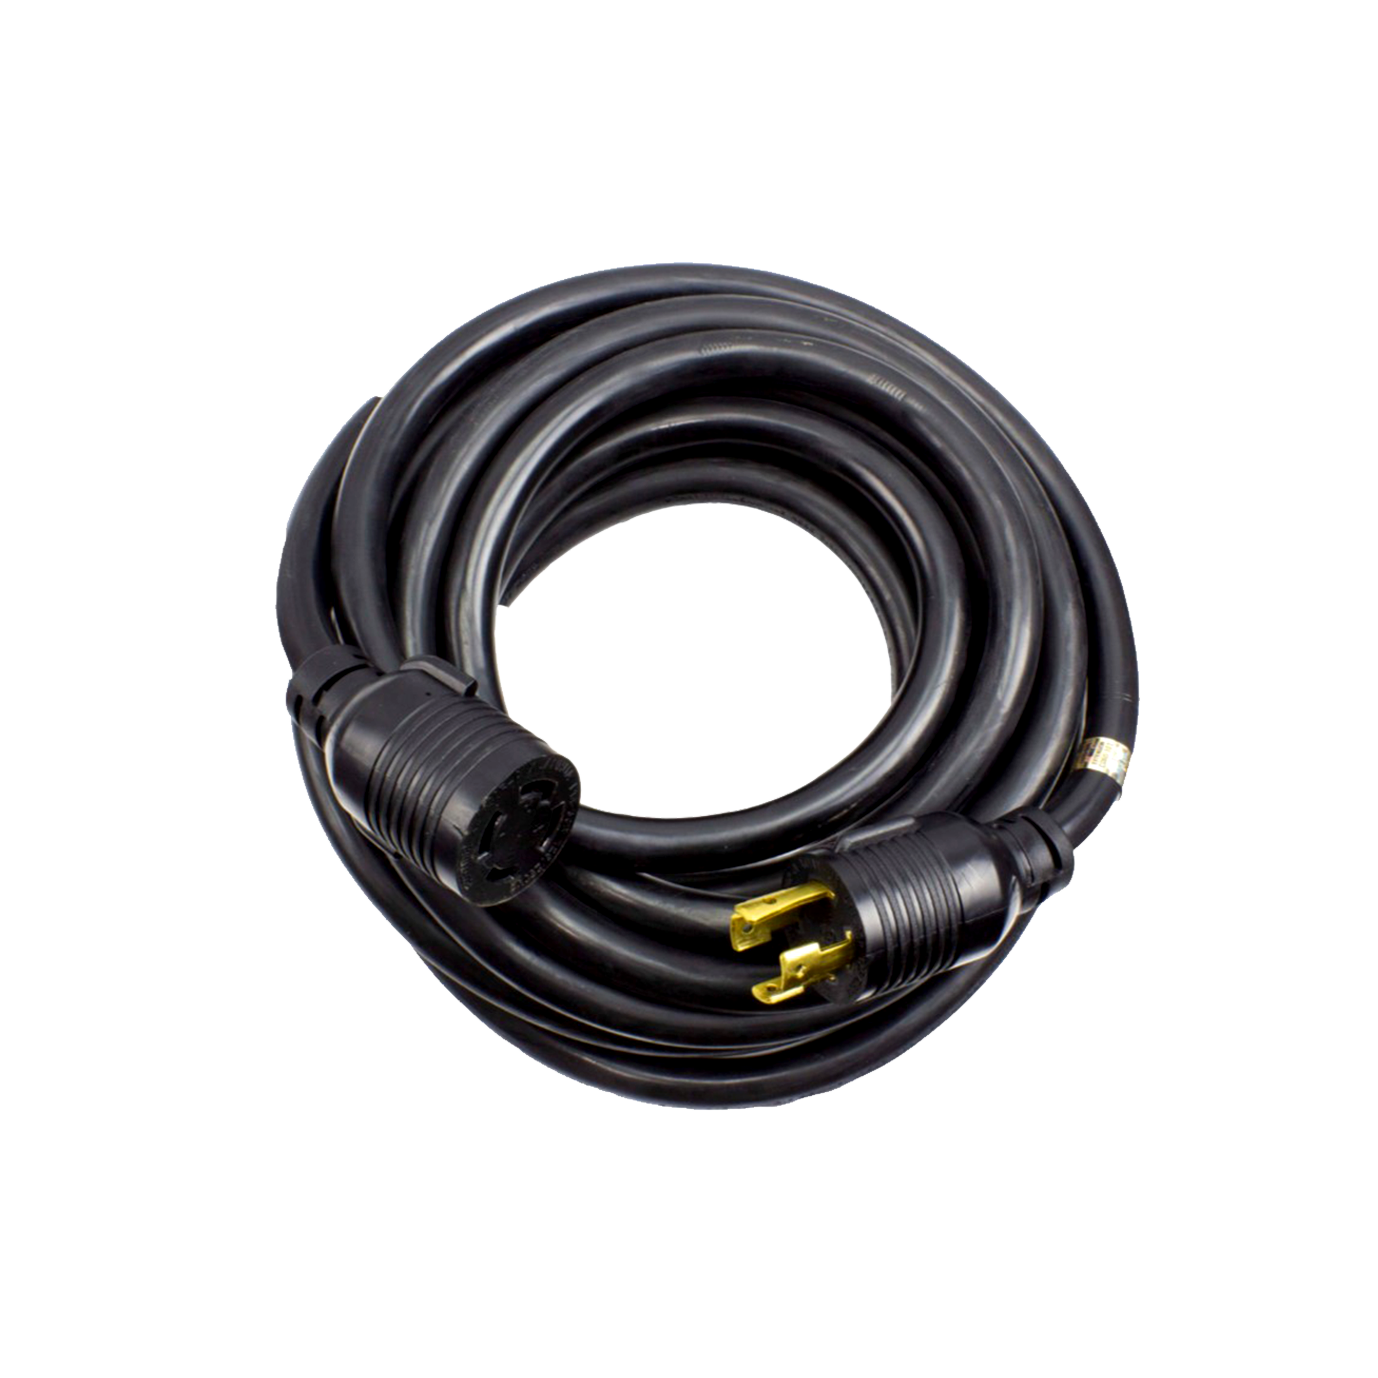 TurtlePro - Power Box Extension Cord